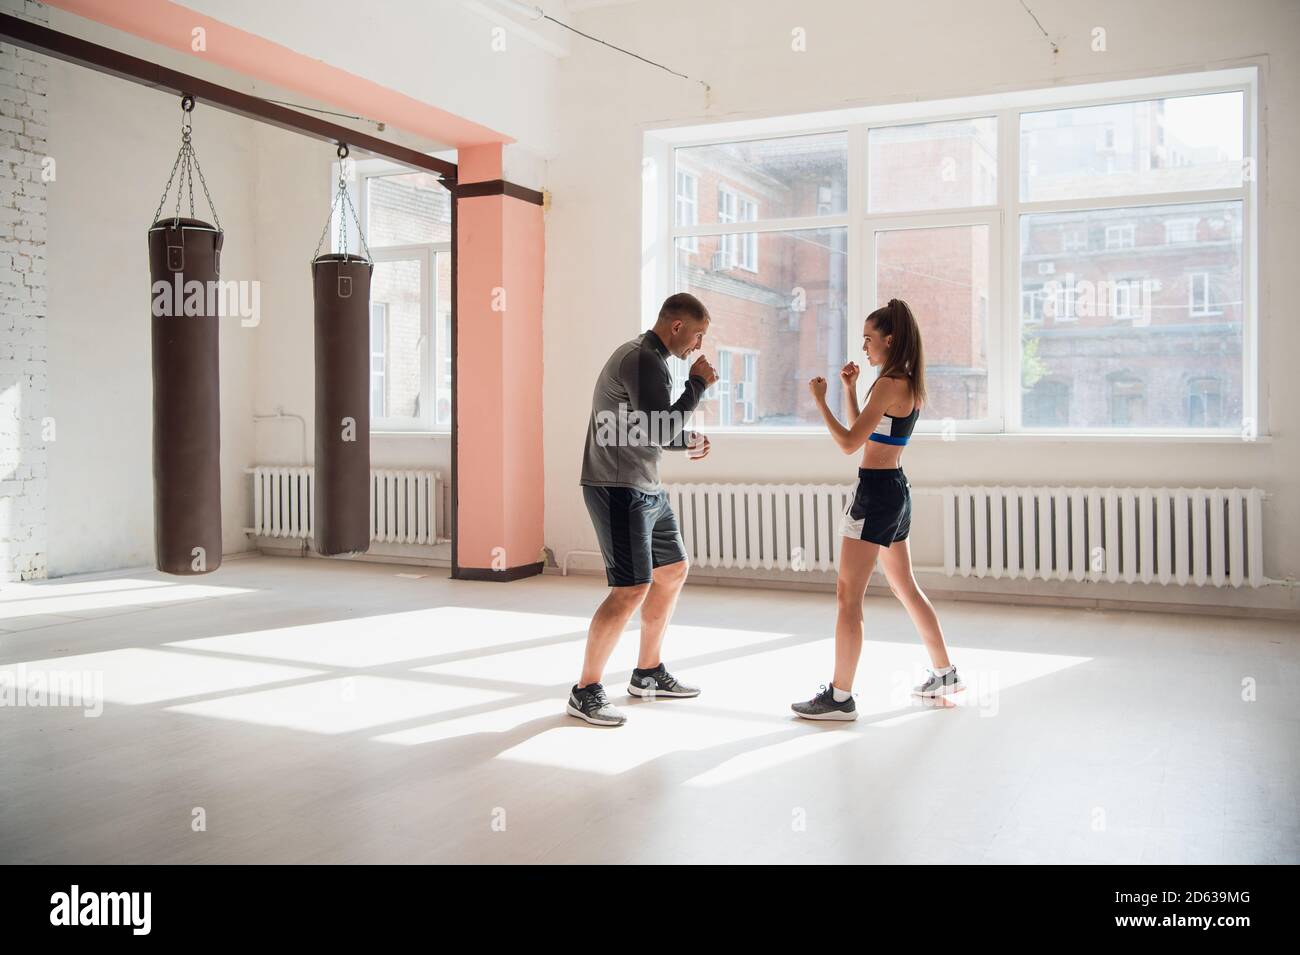 In a spacious loft, a male trainer and his female mentee conduct a boxing training session Stock Photo